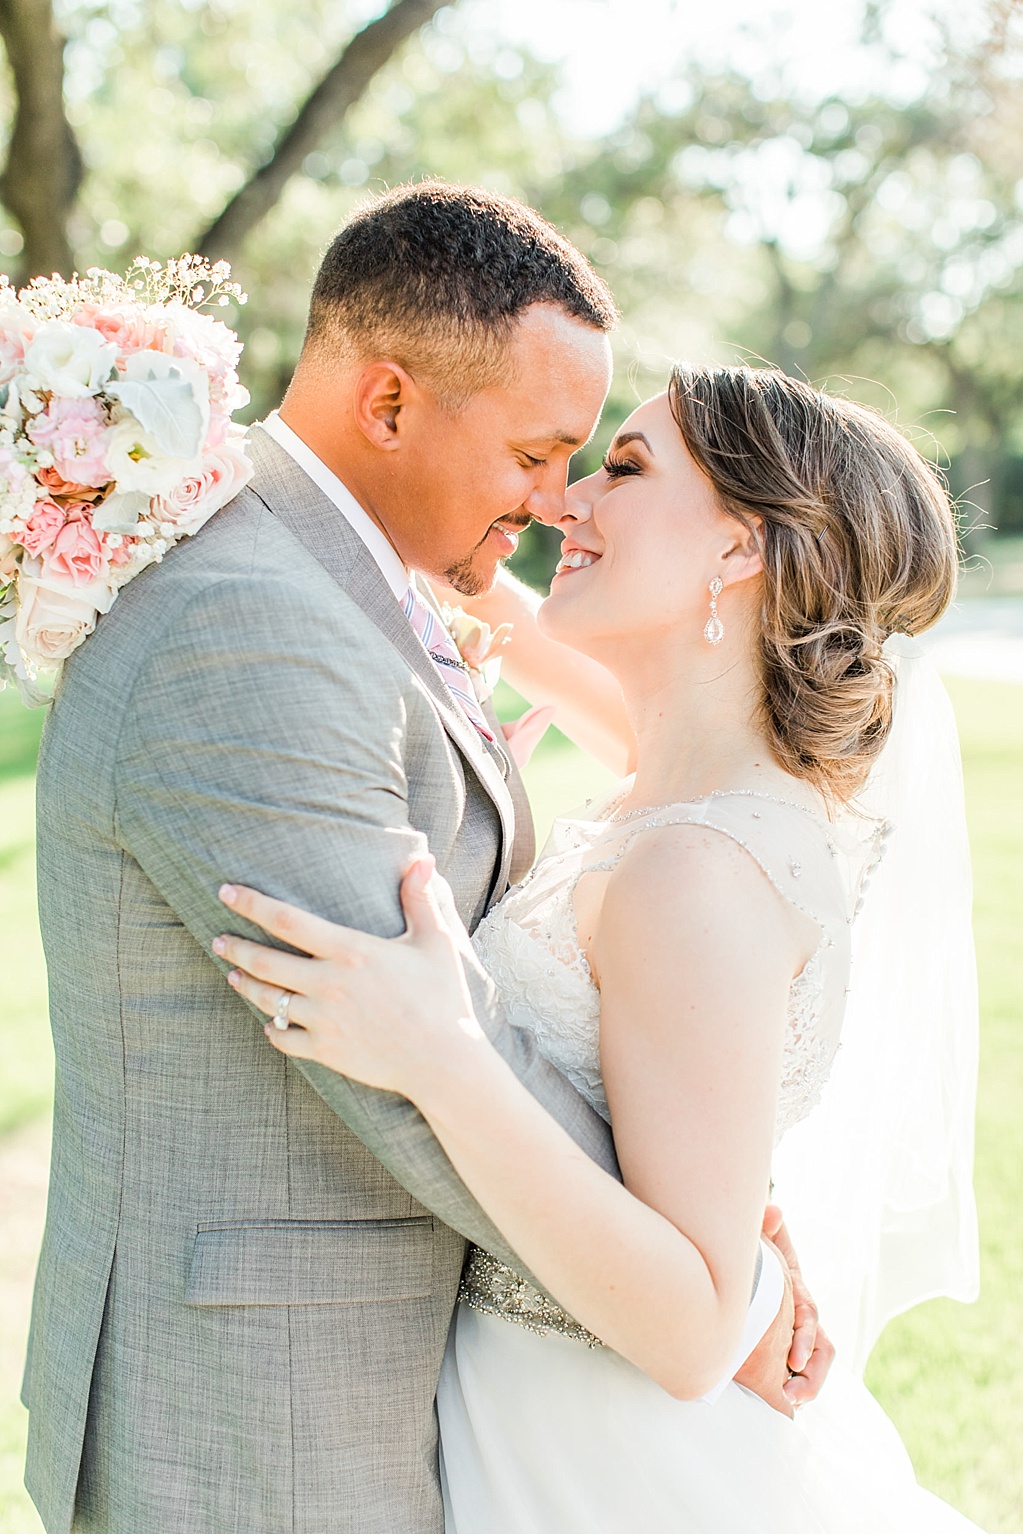 A Blush Vintage Summer Wedding at The Chandelier of Gruene in New Braunfels Texas by Allison Jeffers Photography 0114